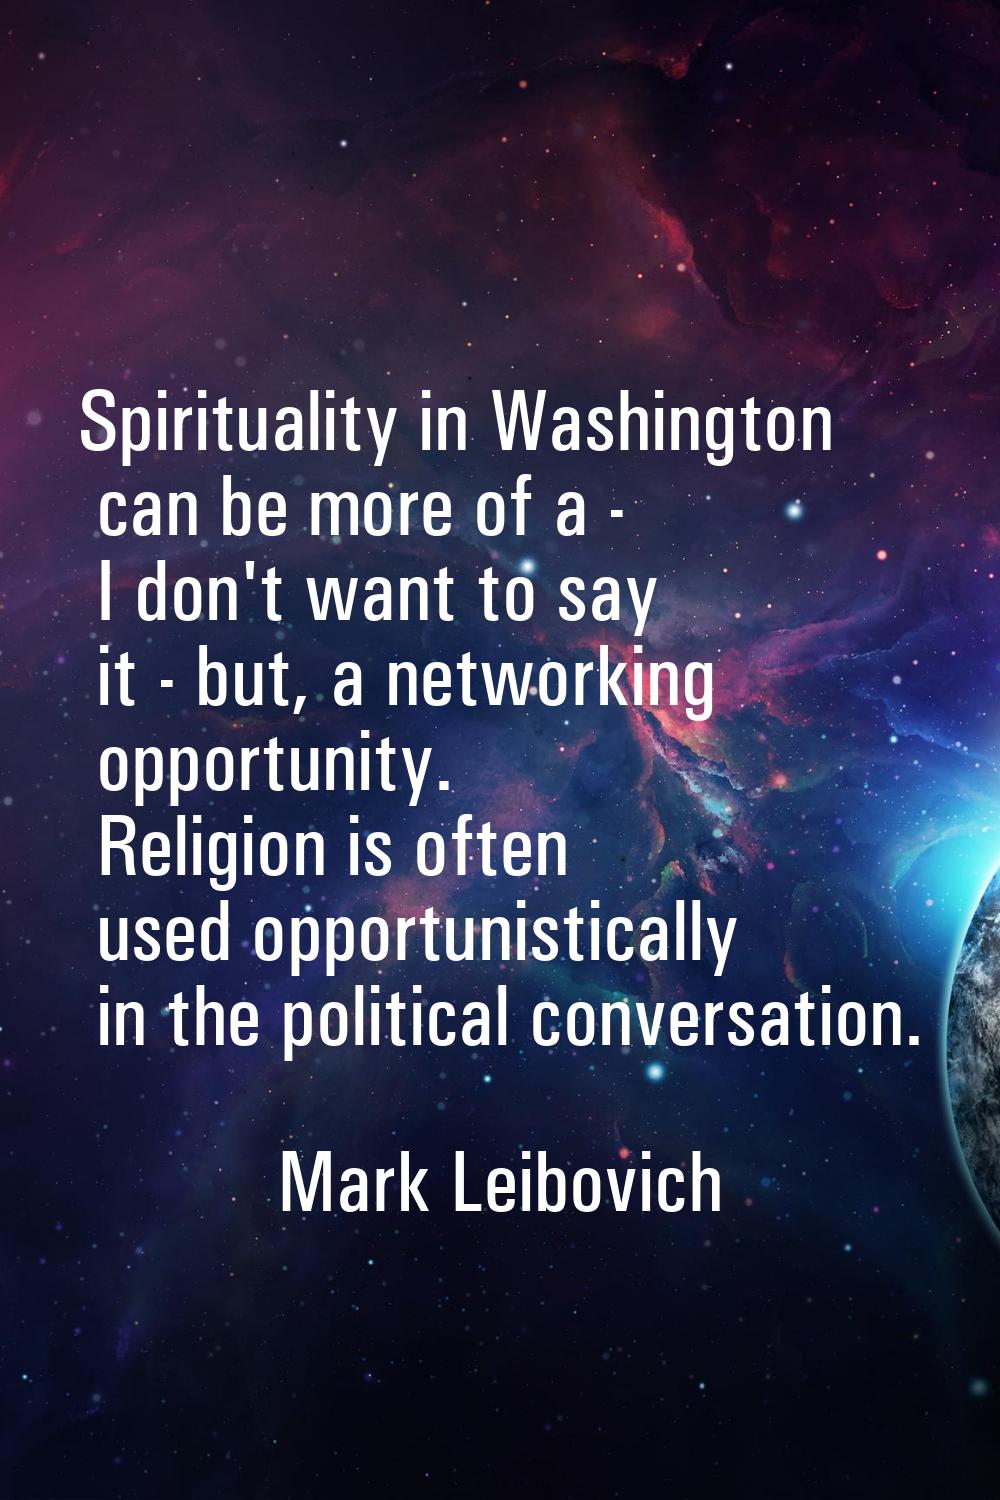 Spirituality in Washington can be more of a - I don't want to say it - but, a networking opportunit